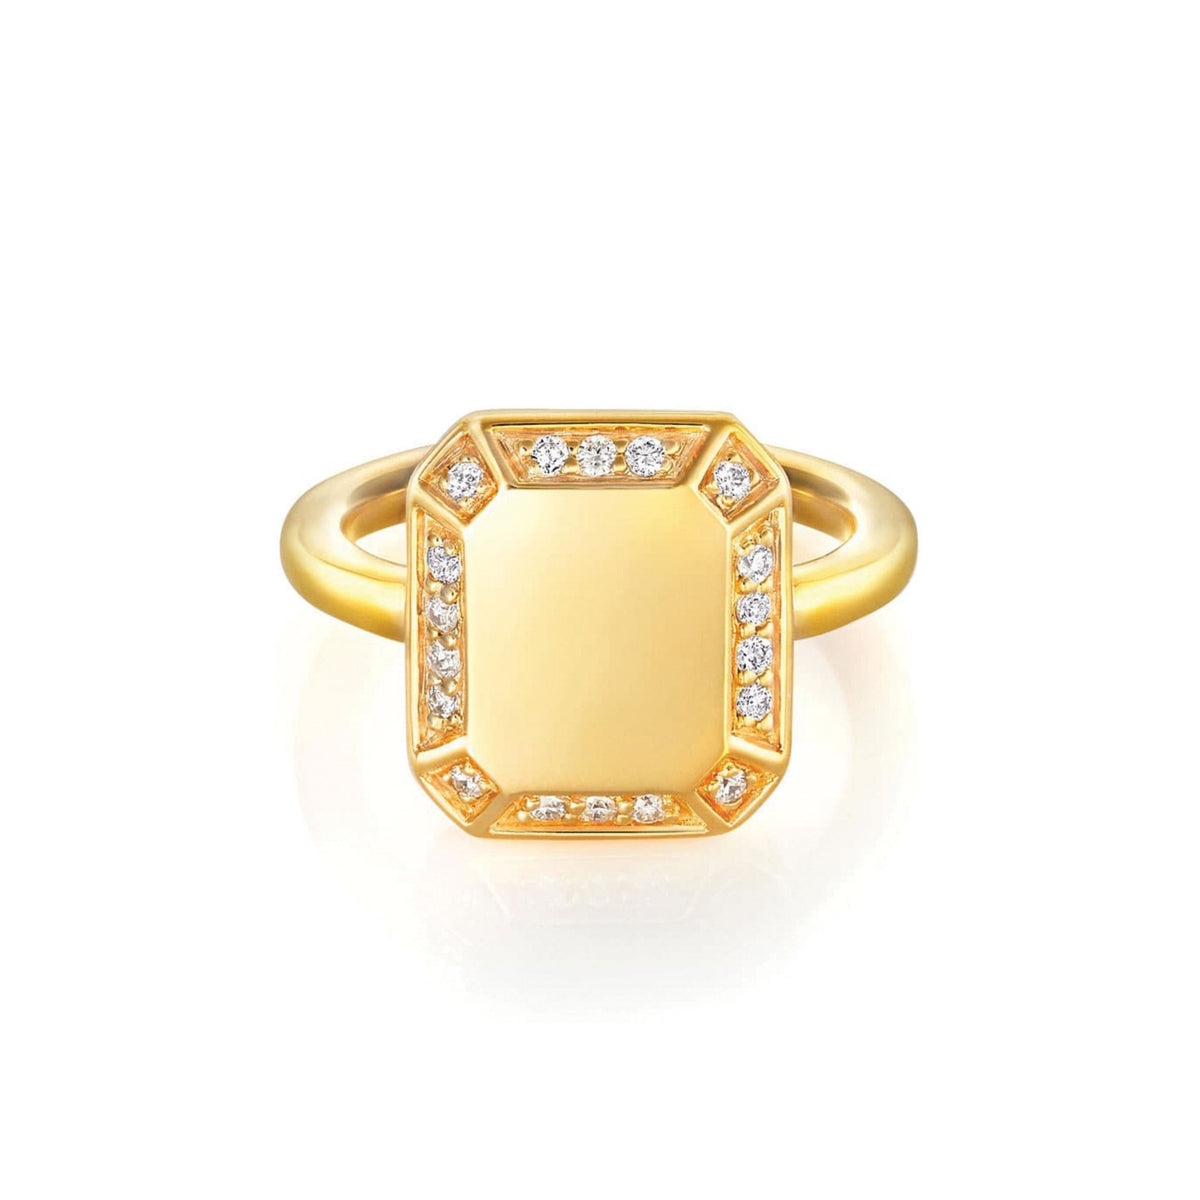 Emerald Signet Ring in Yellow Gold with Diamond Pave